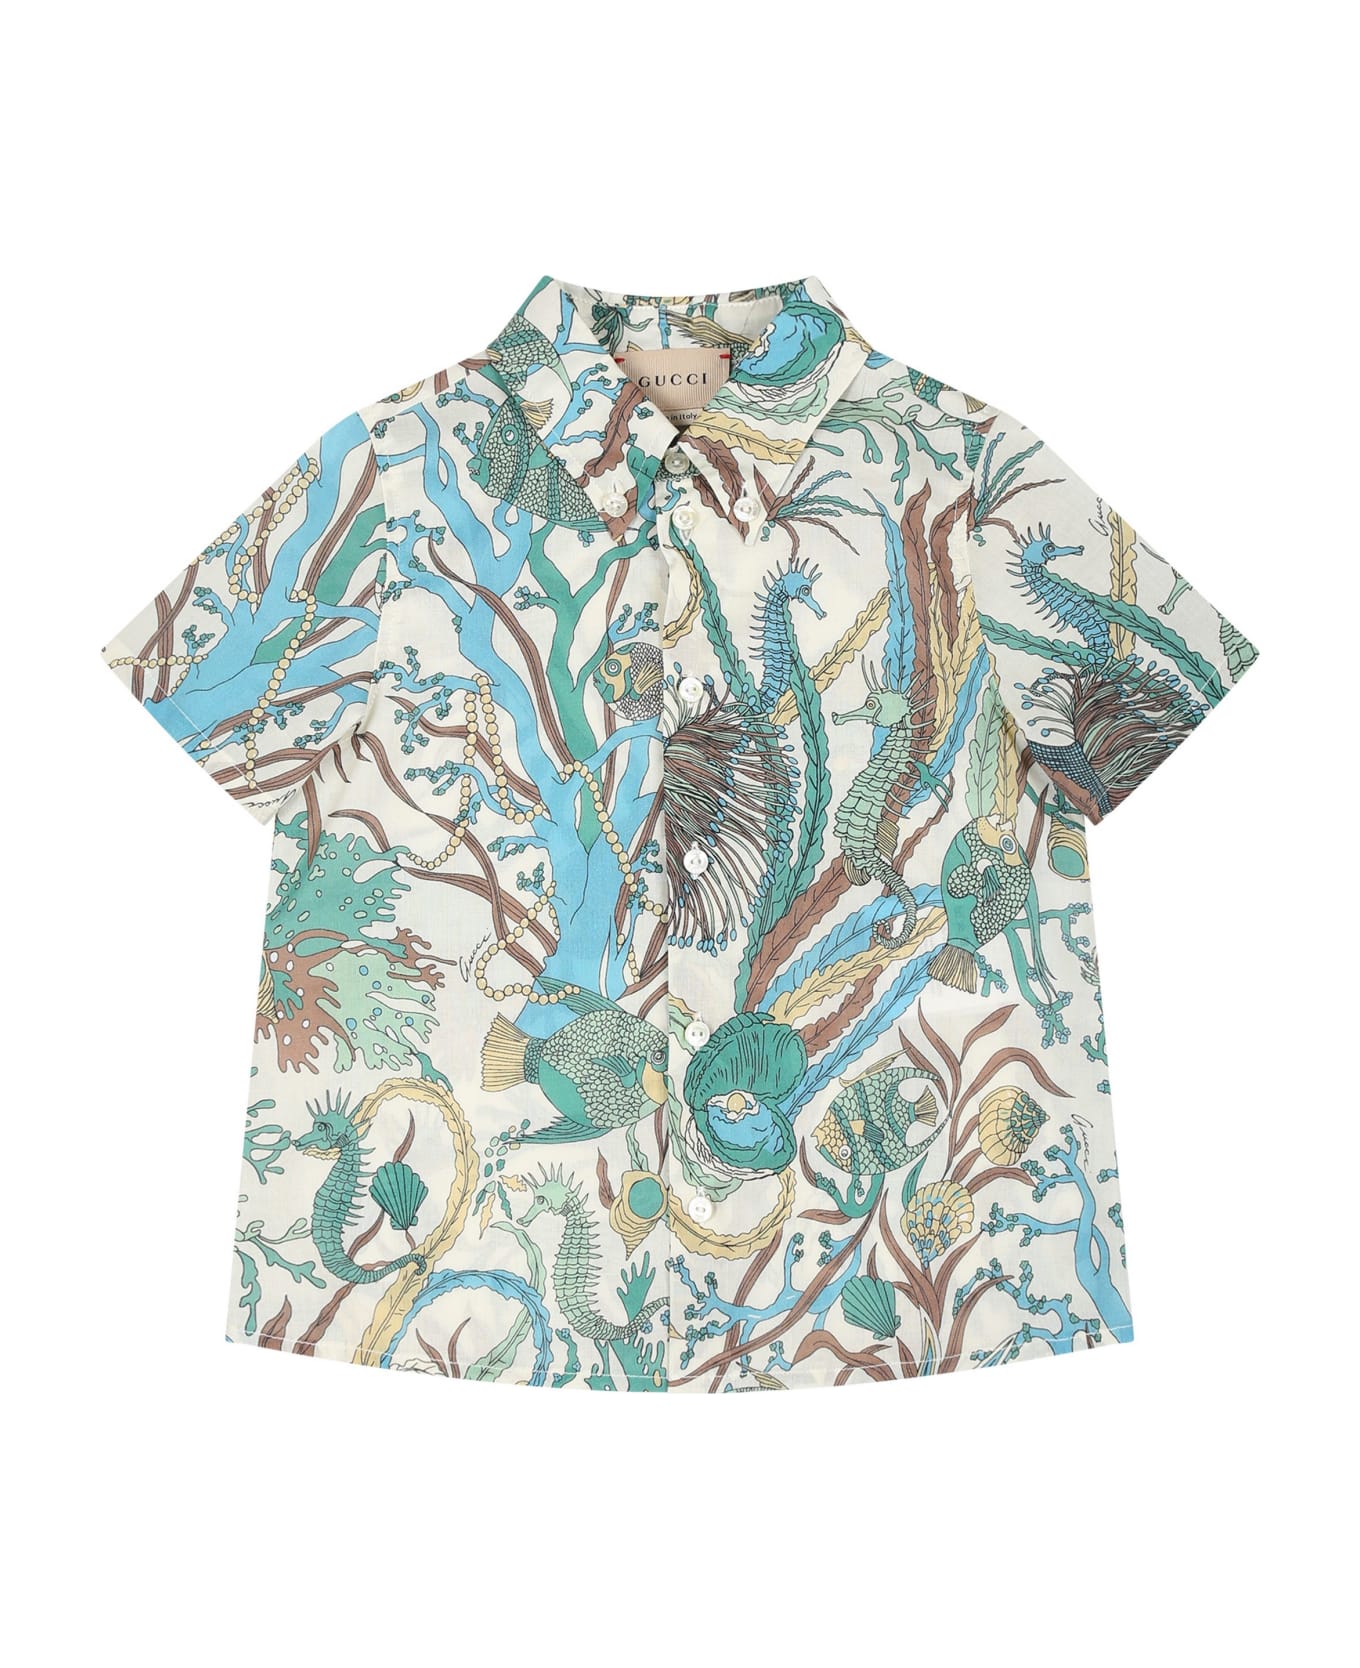 Gucci Ivory Shirt For Baby Boy With Marine Print - Multicolor シャツ